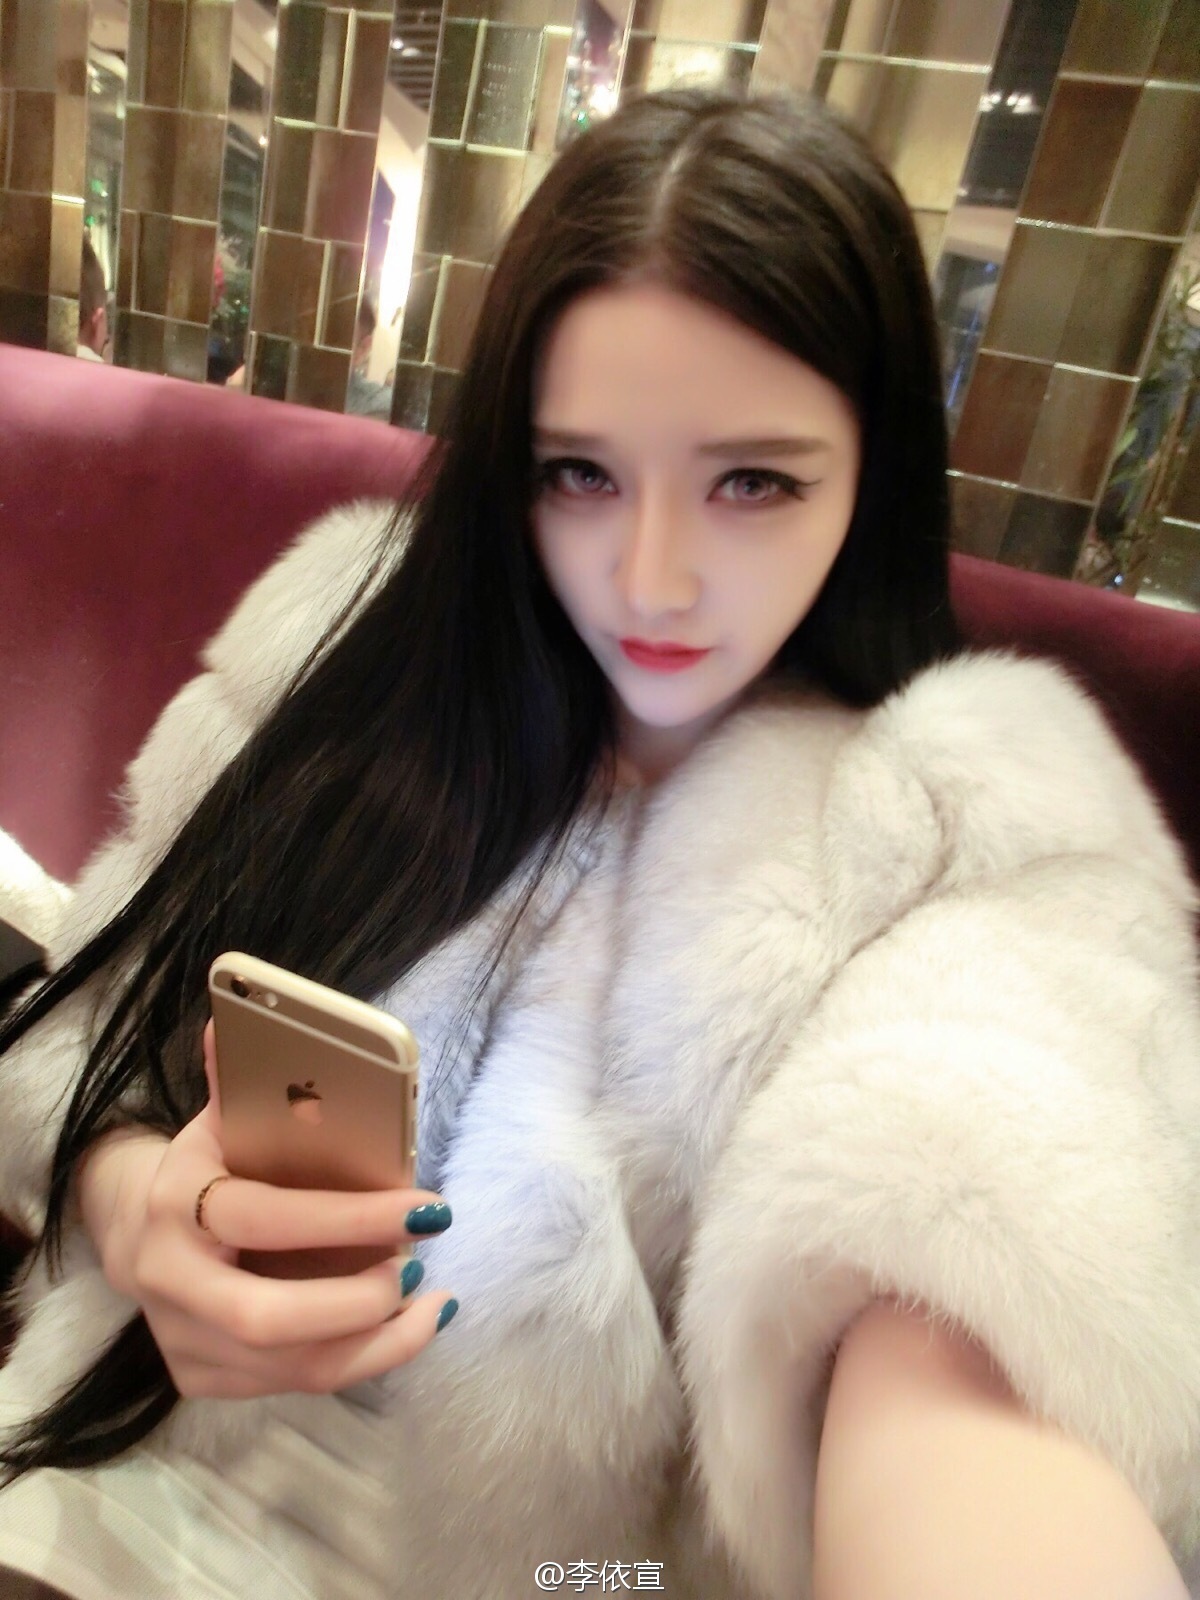 Li Yixuan's private micro blog pictures